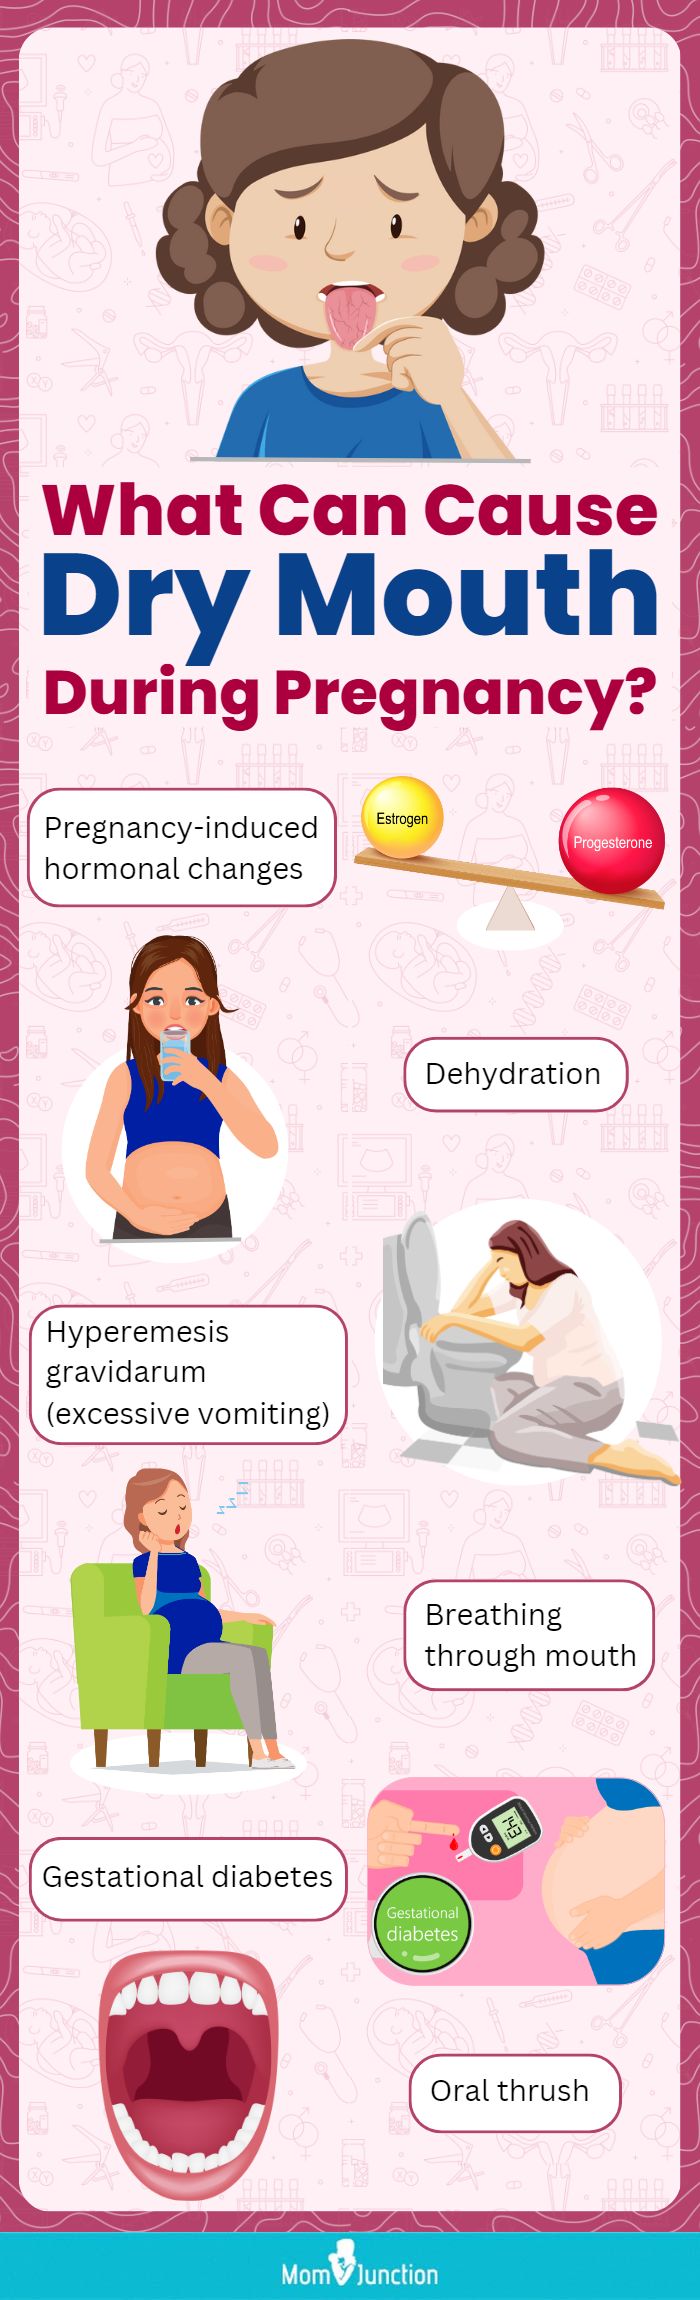 what can cause dry mouth during pregnancy (infographic)